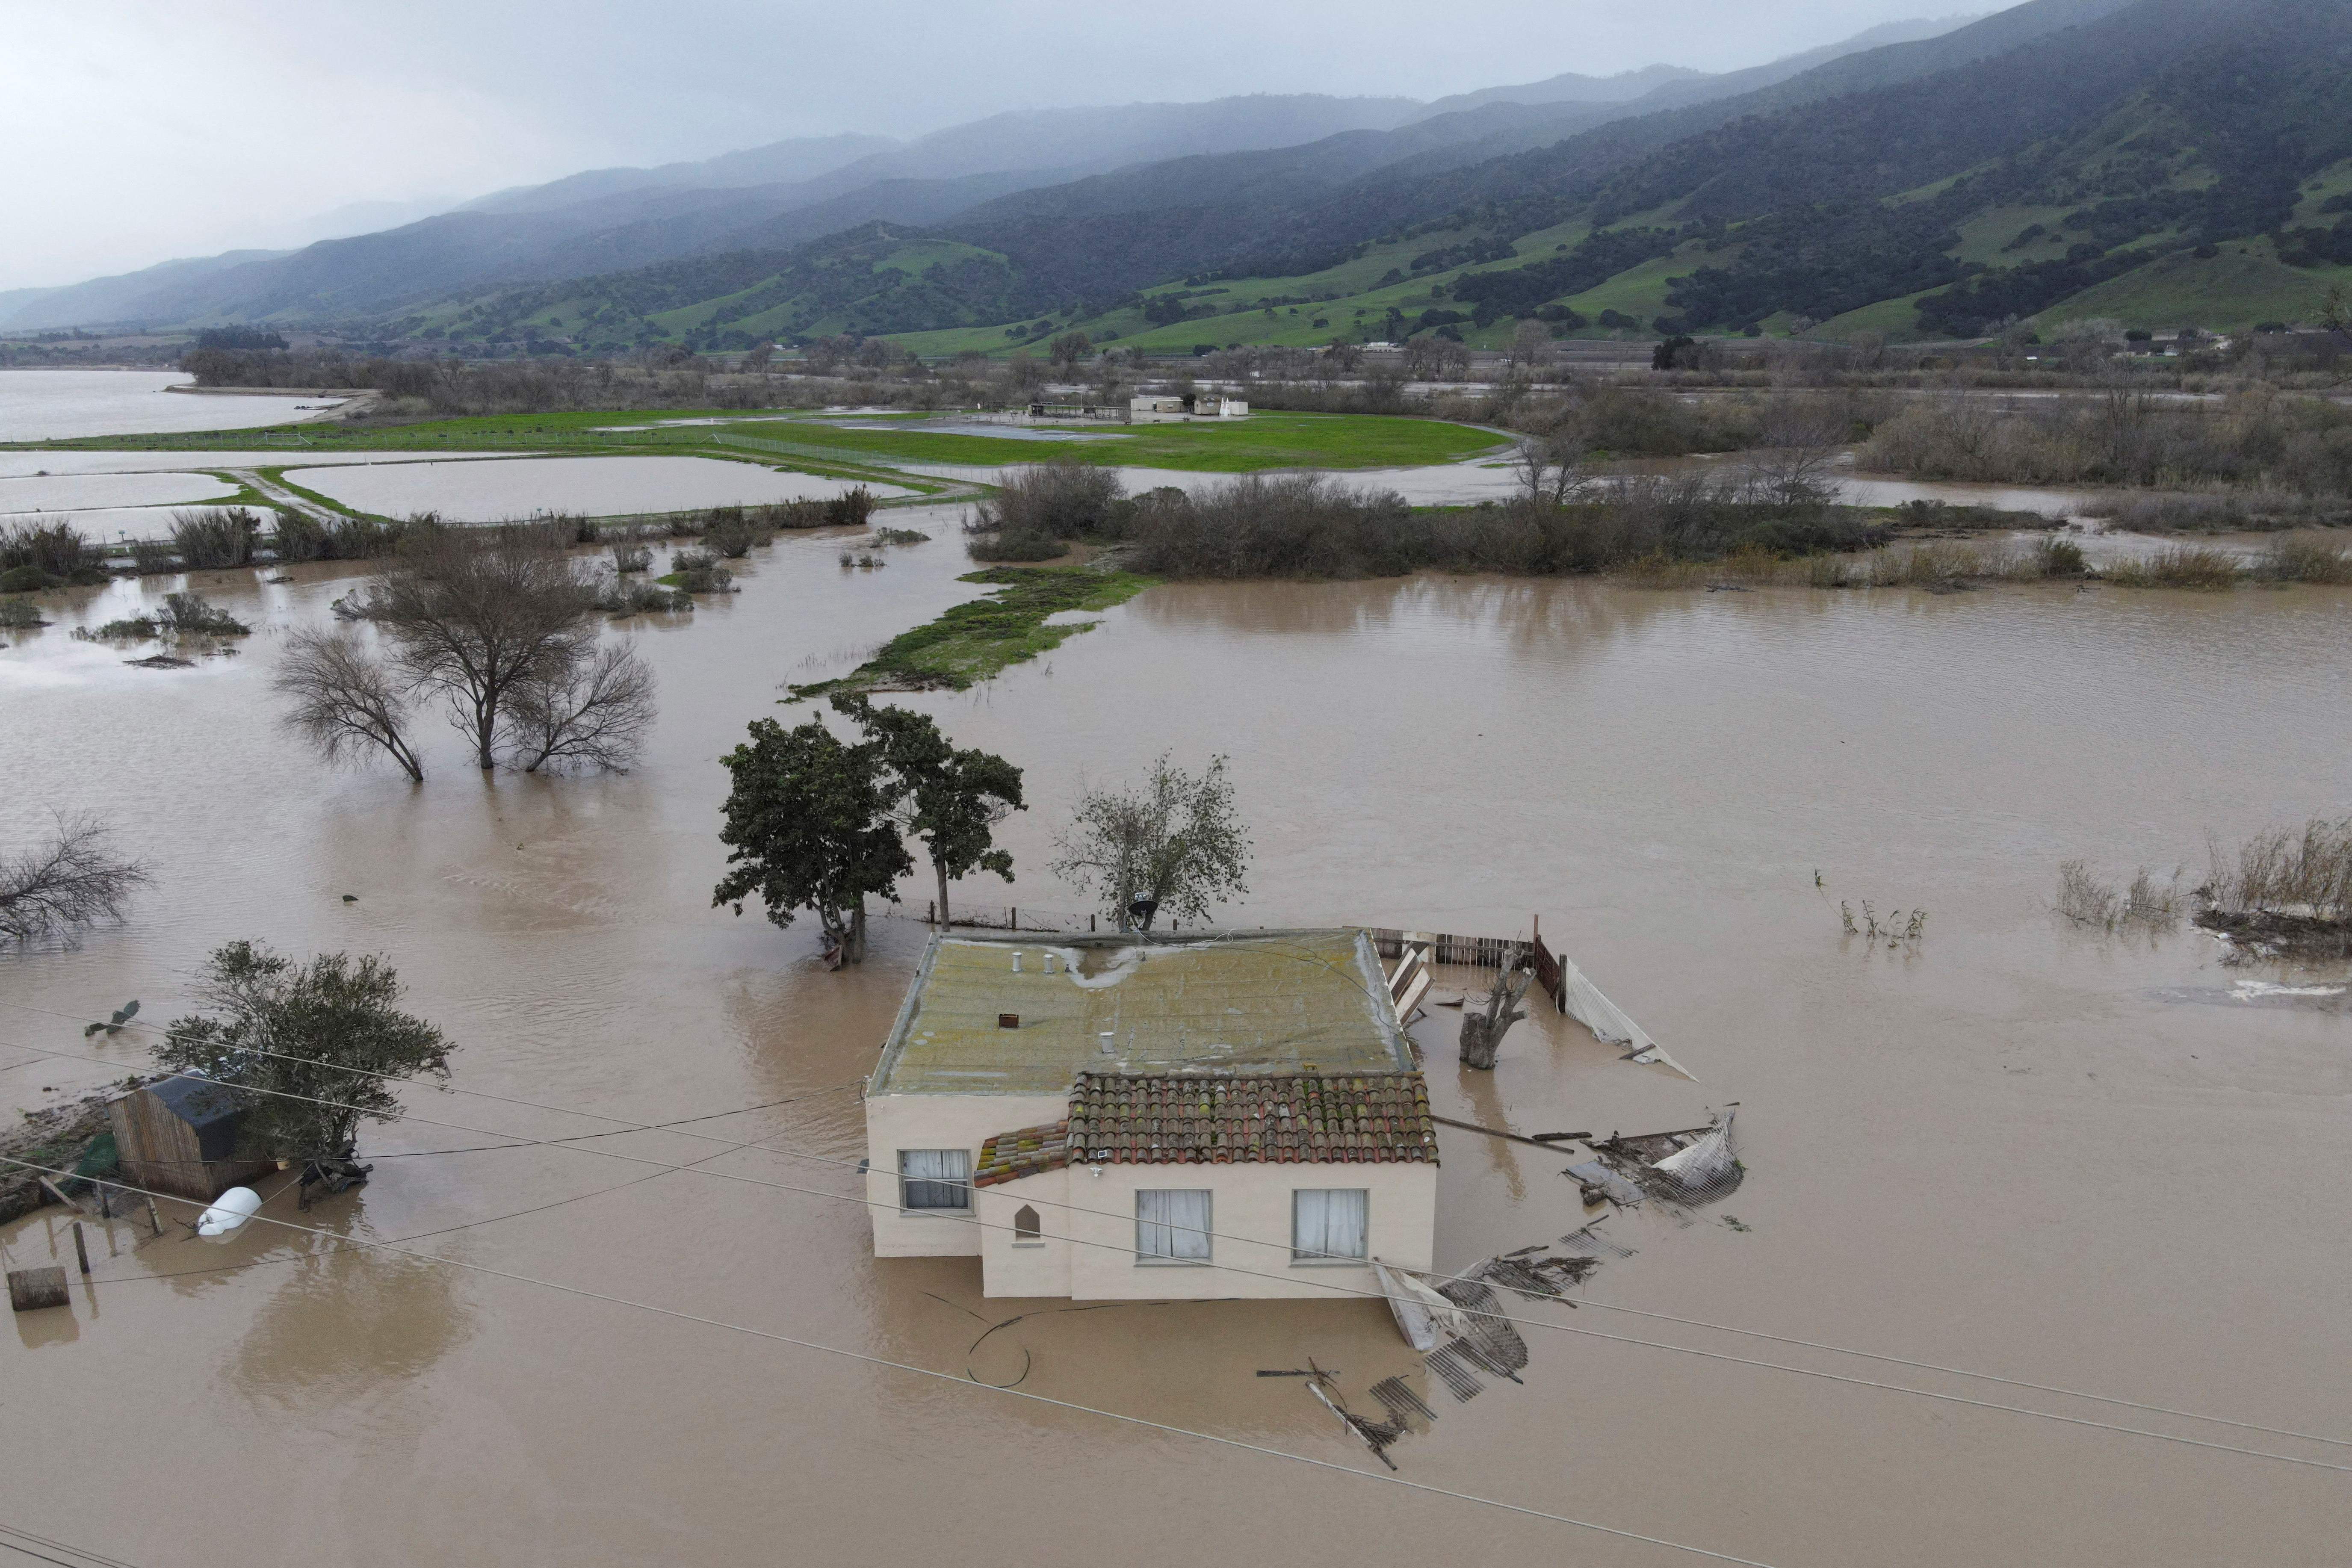 A new low pressure system hit the region on Friday, threatening to isolate the Monterey Peninsula and flood the city of Salinas (REUTERS / David Swanson)